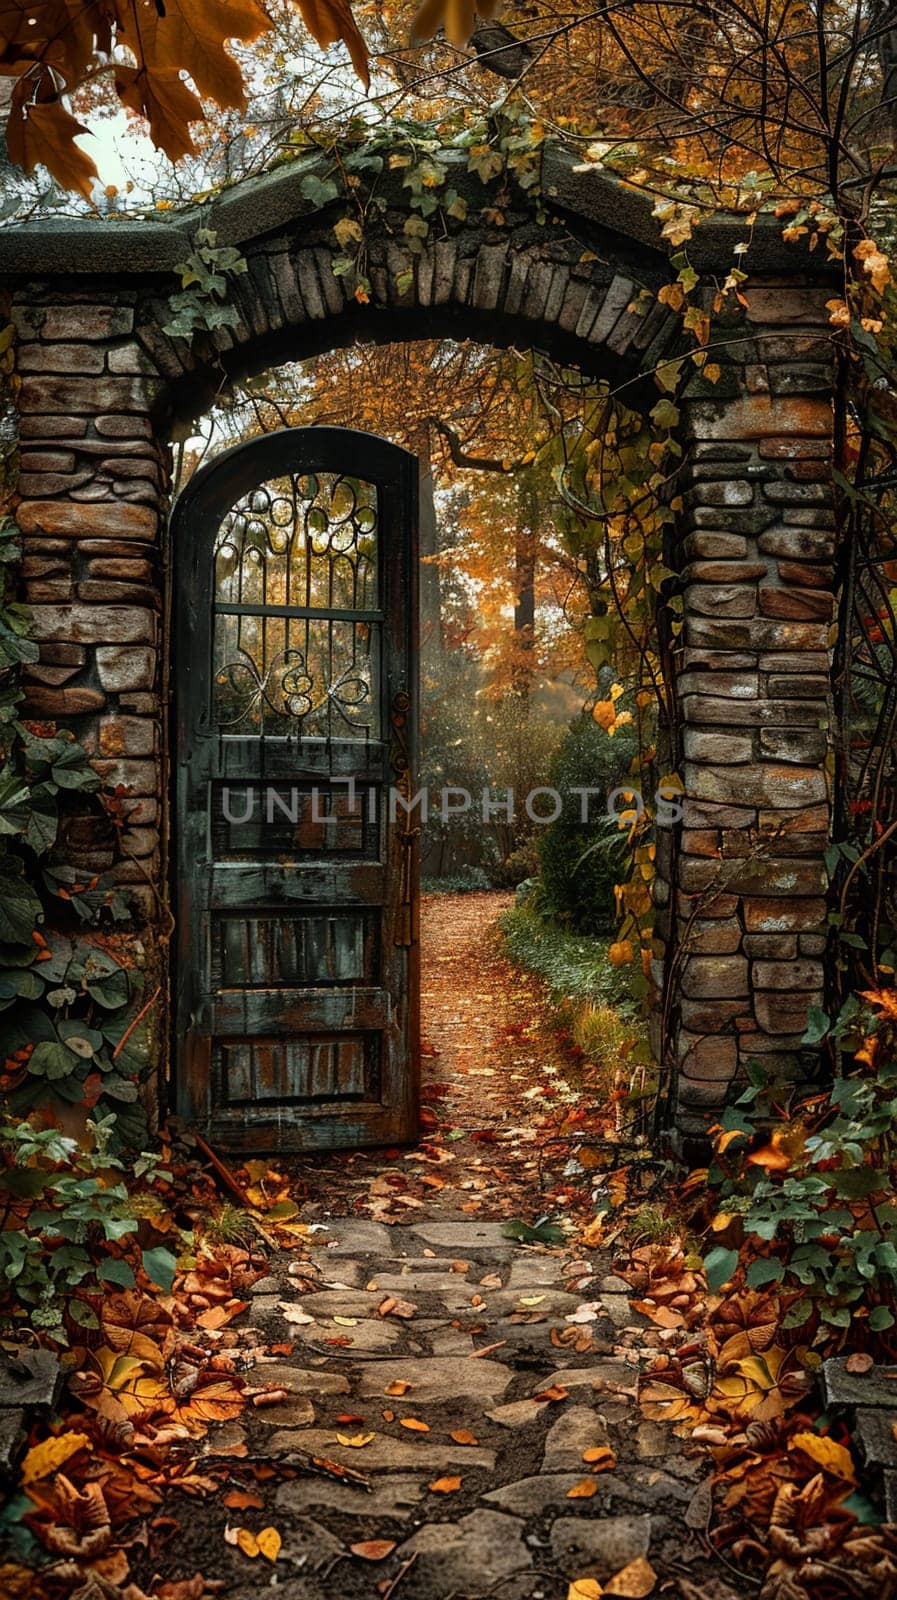 A rustic gate leading into a secret garden, inviting mystery and discovery.